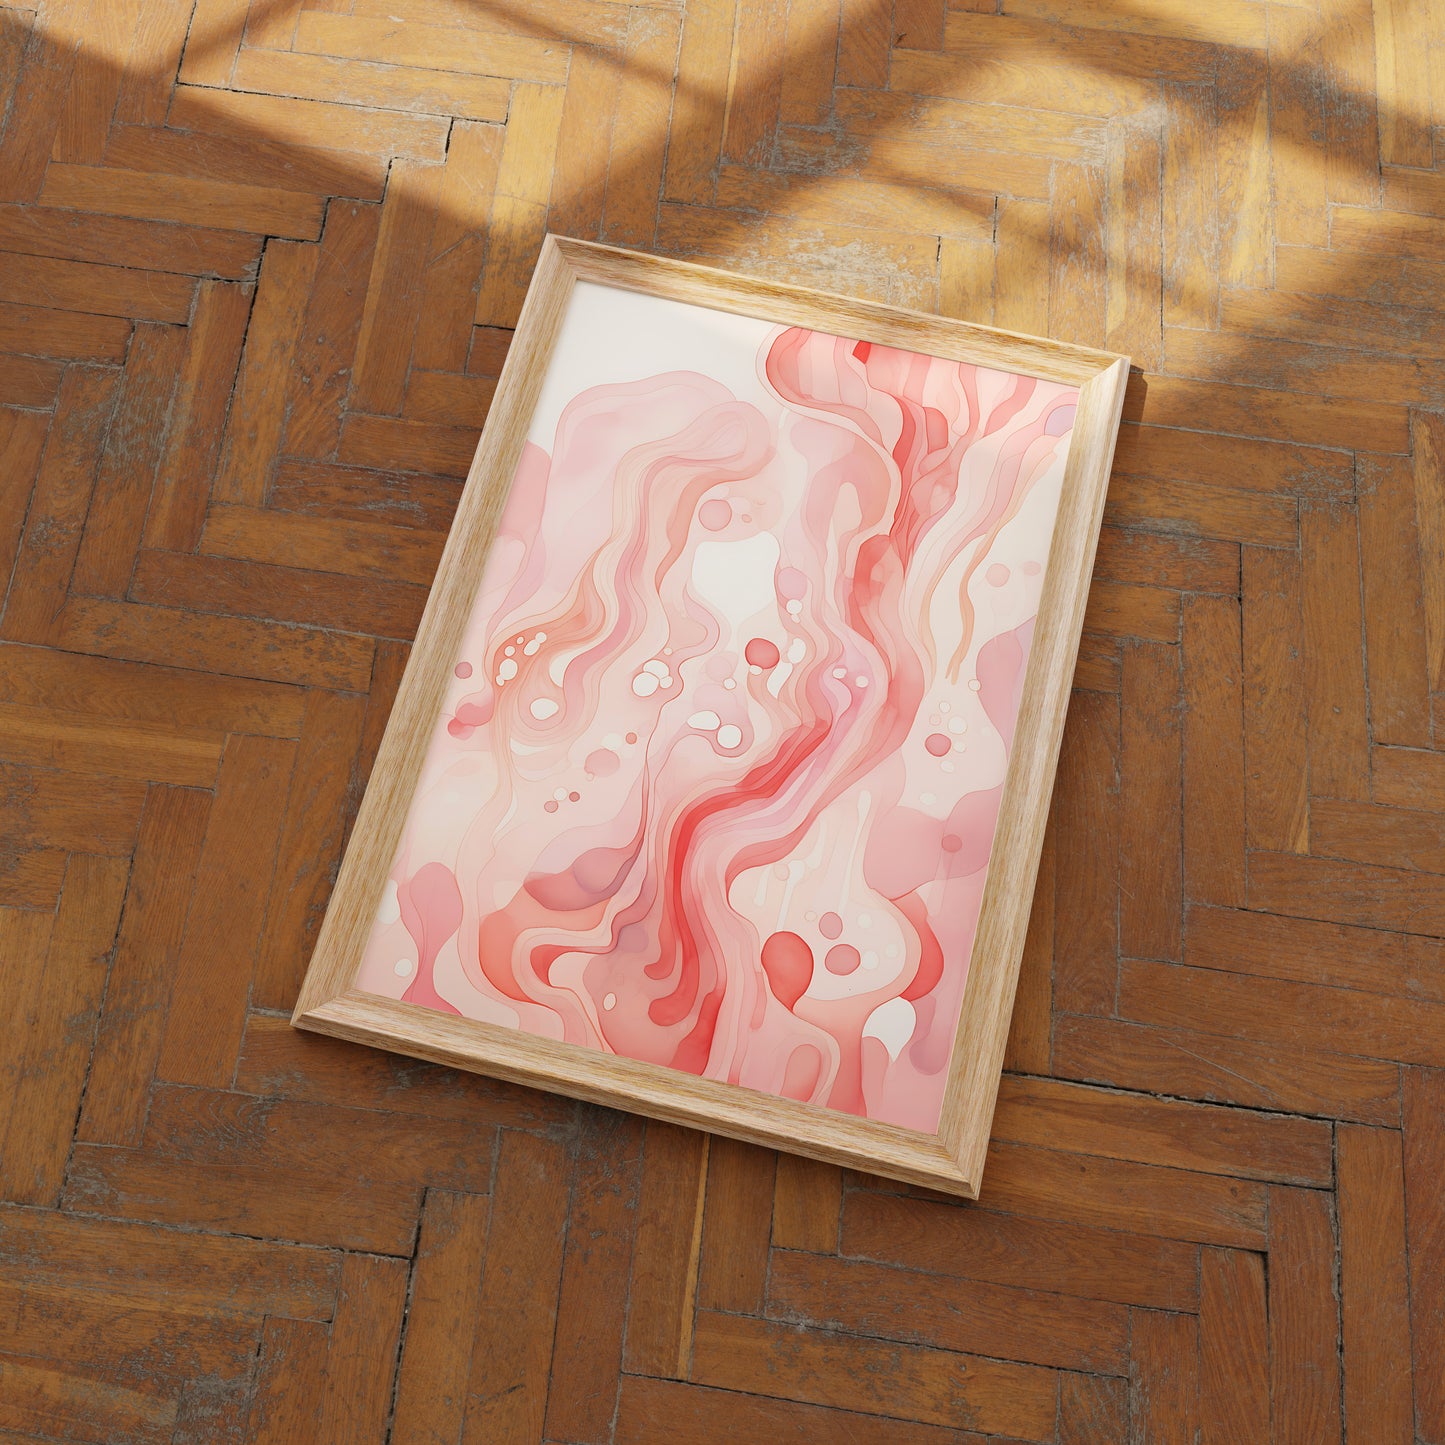 Abstract pink and white marbled art in a wooden frame on a herringbone floor.